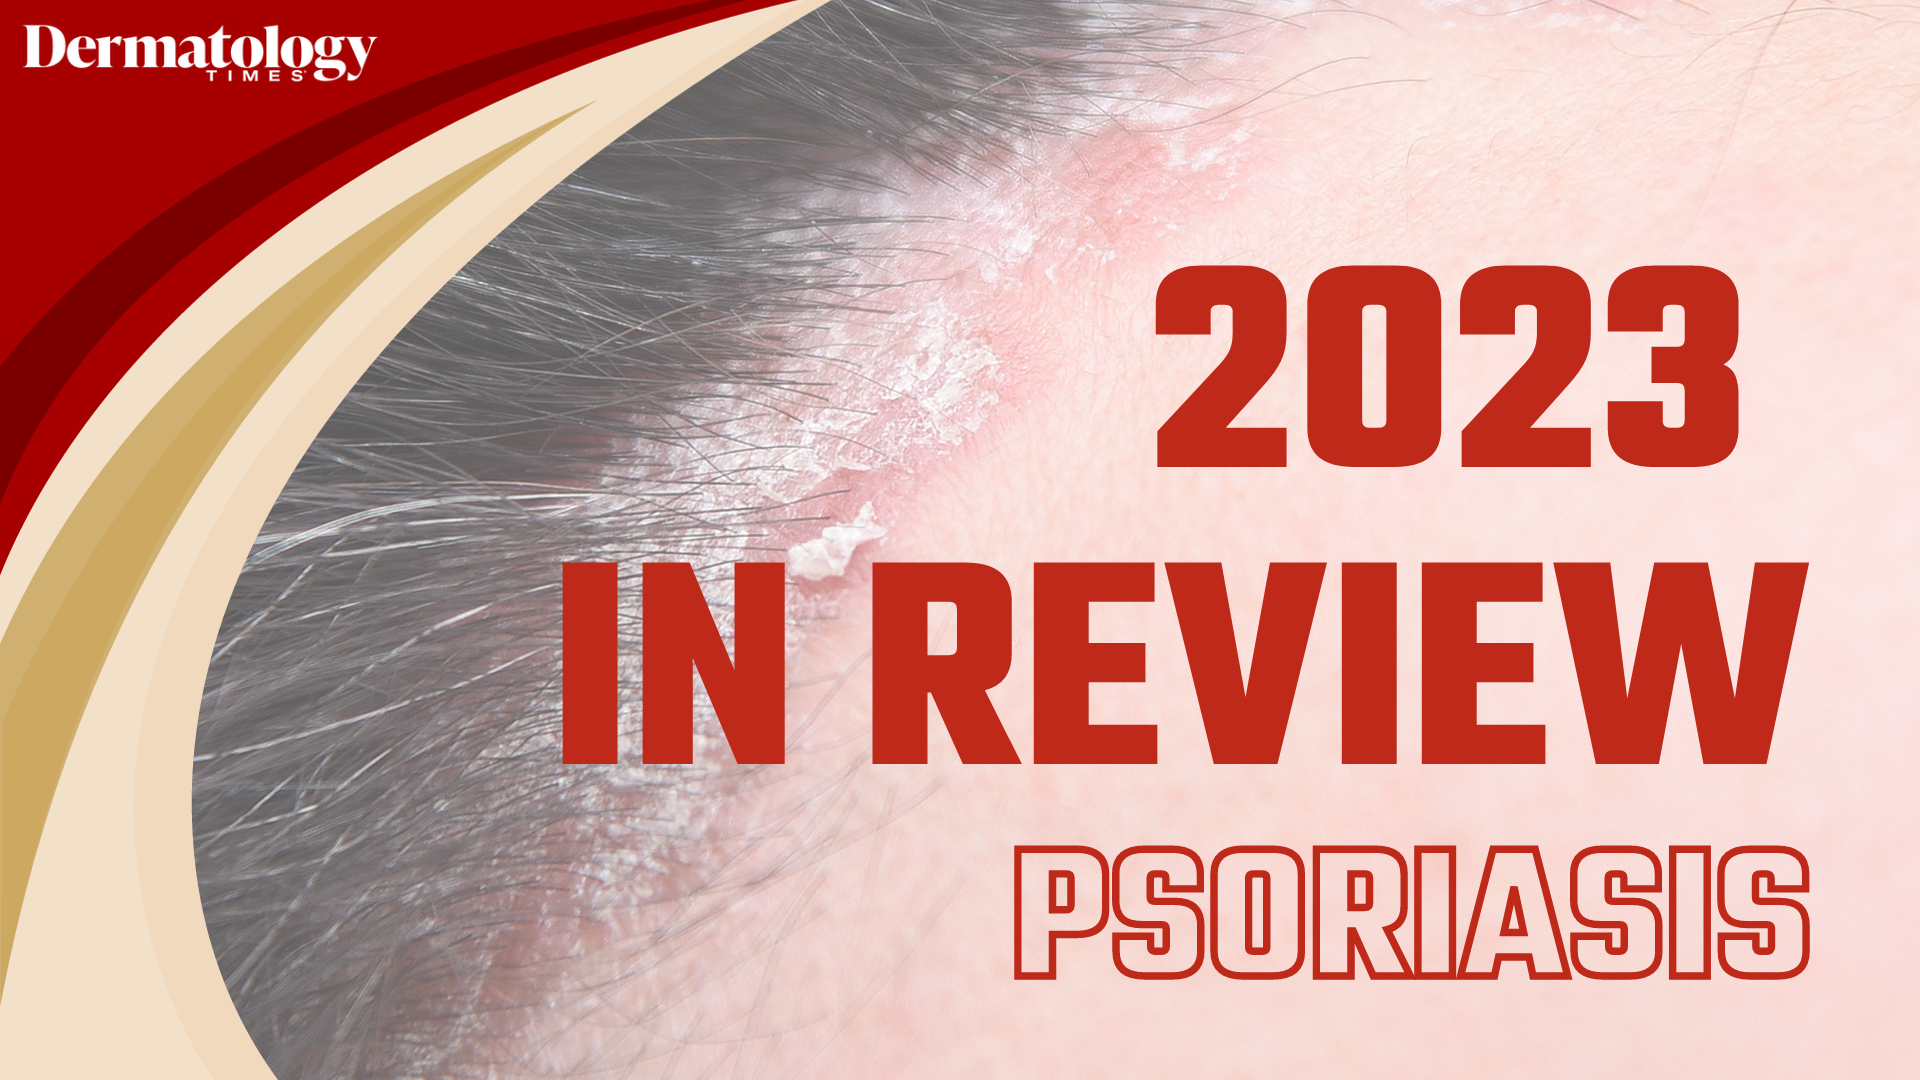 Dermatology Times 2023 In Review: Psoriasis